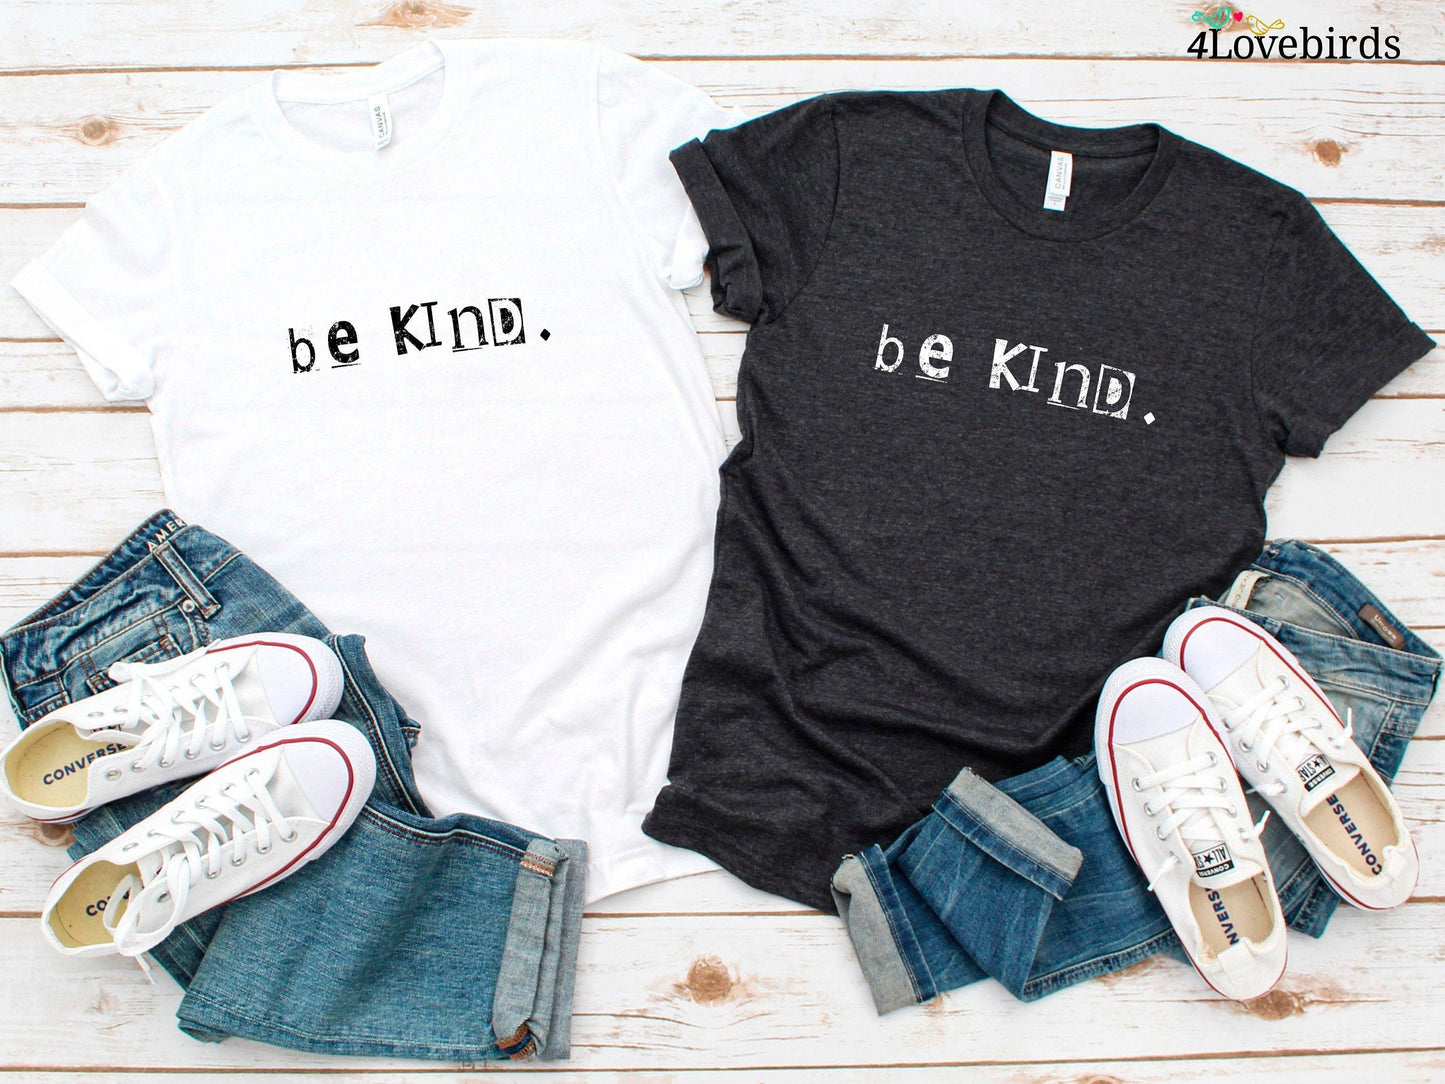 Be Kind Hoodie, Be Kind,Inspirational Shirt,Positivity Quote Tee,Womens Shirt, Ladies Shirt, Positive Vibes Shirt, Be Kind Tee UNISEX - 4Lovebirds